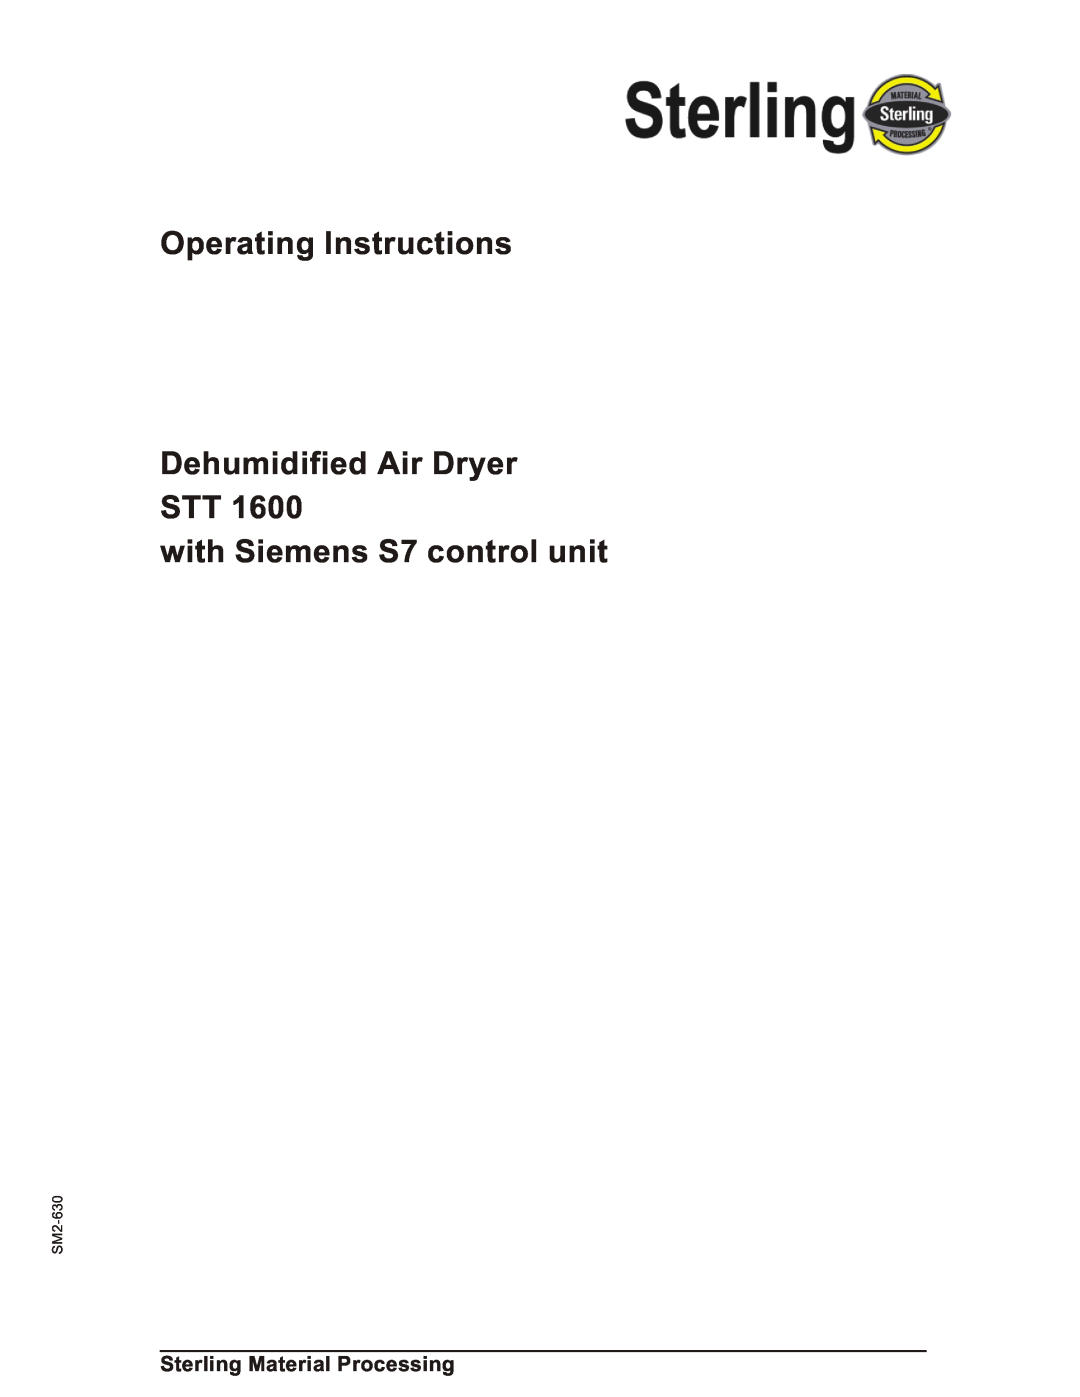 Sterling STT 1600 operating instructions Operating Instructions Dehumidified Air Dryer STT, with Siemens S7 control unit 